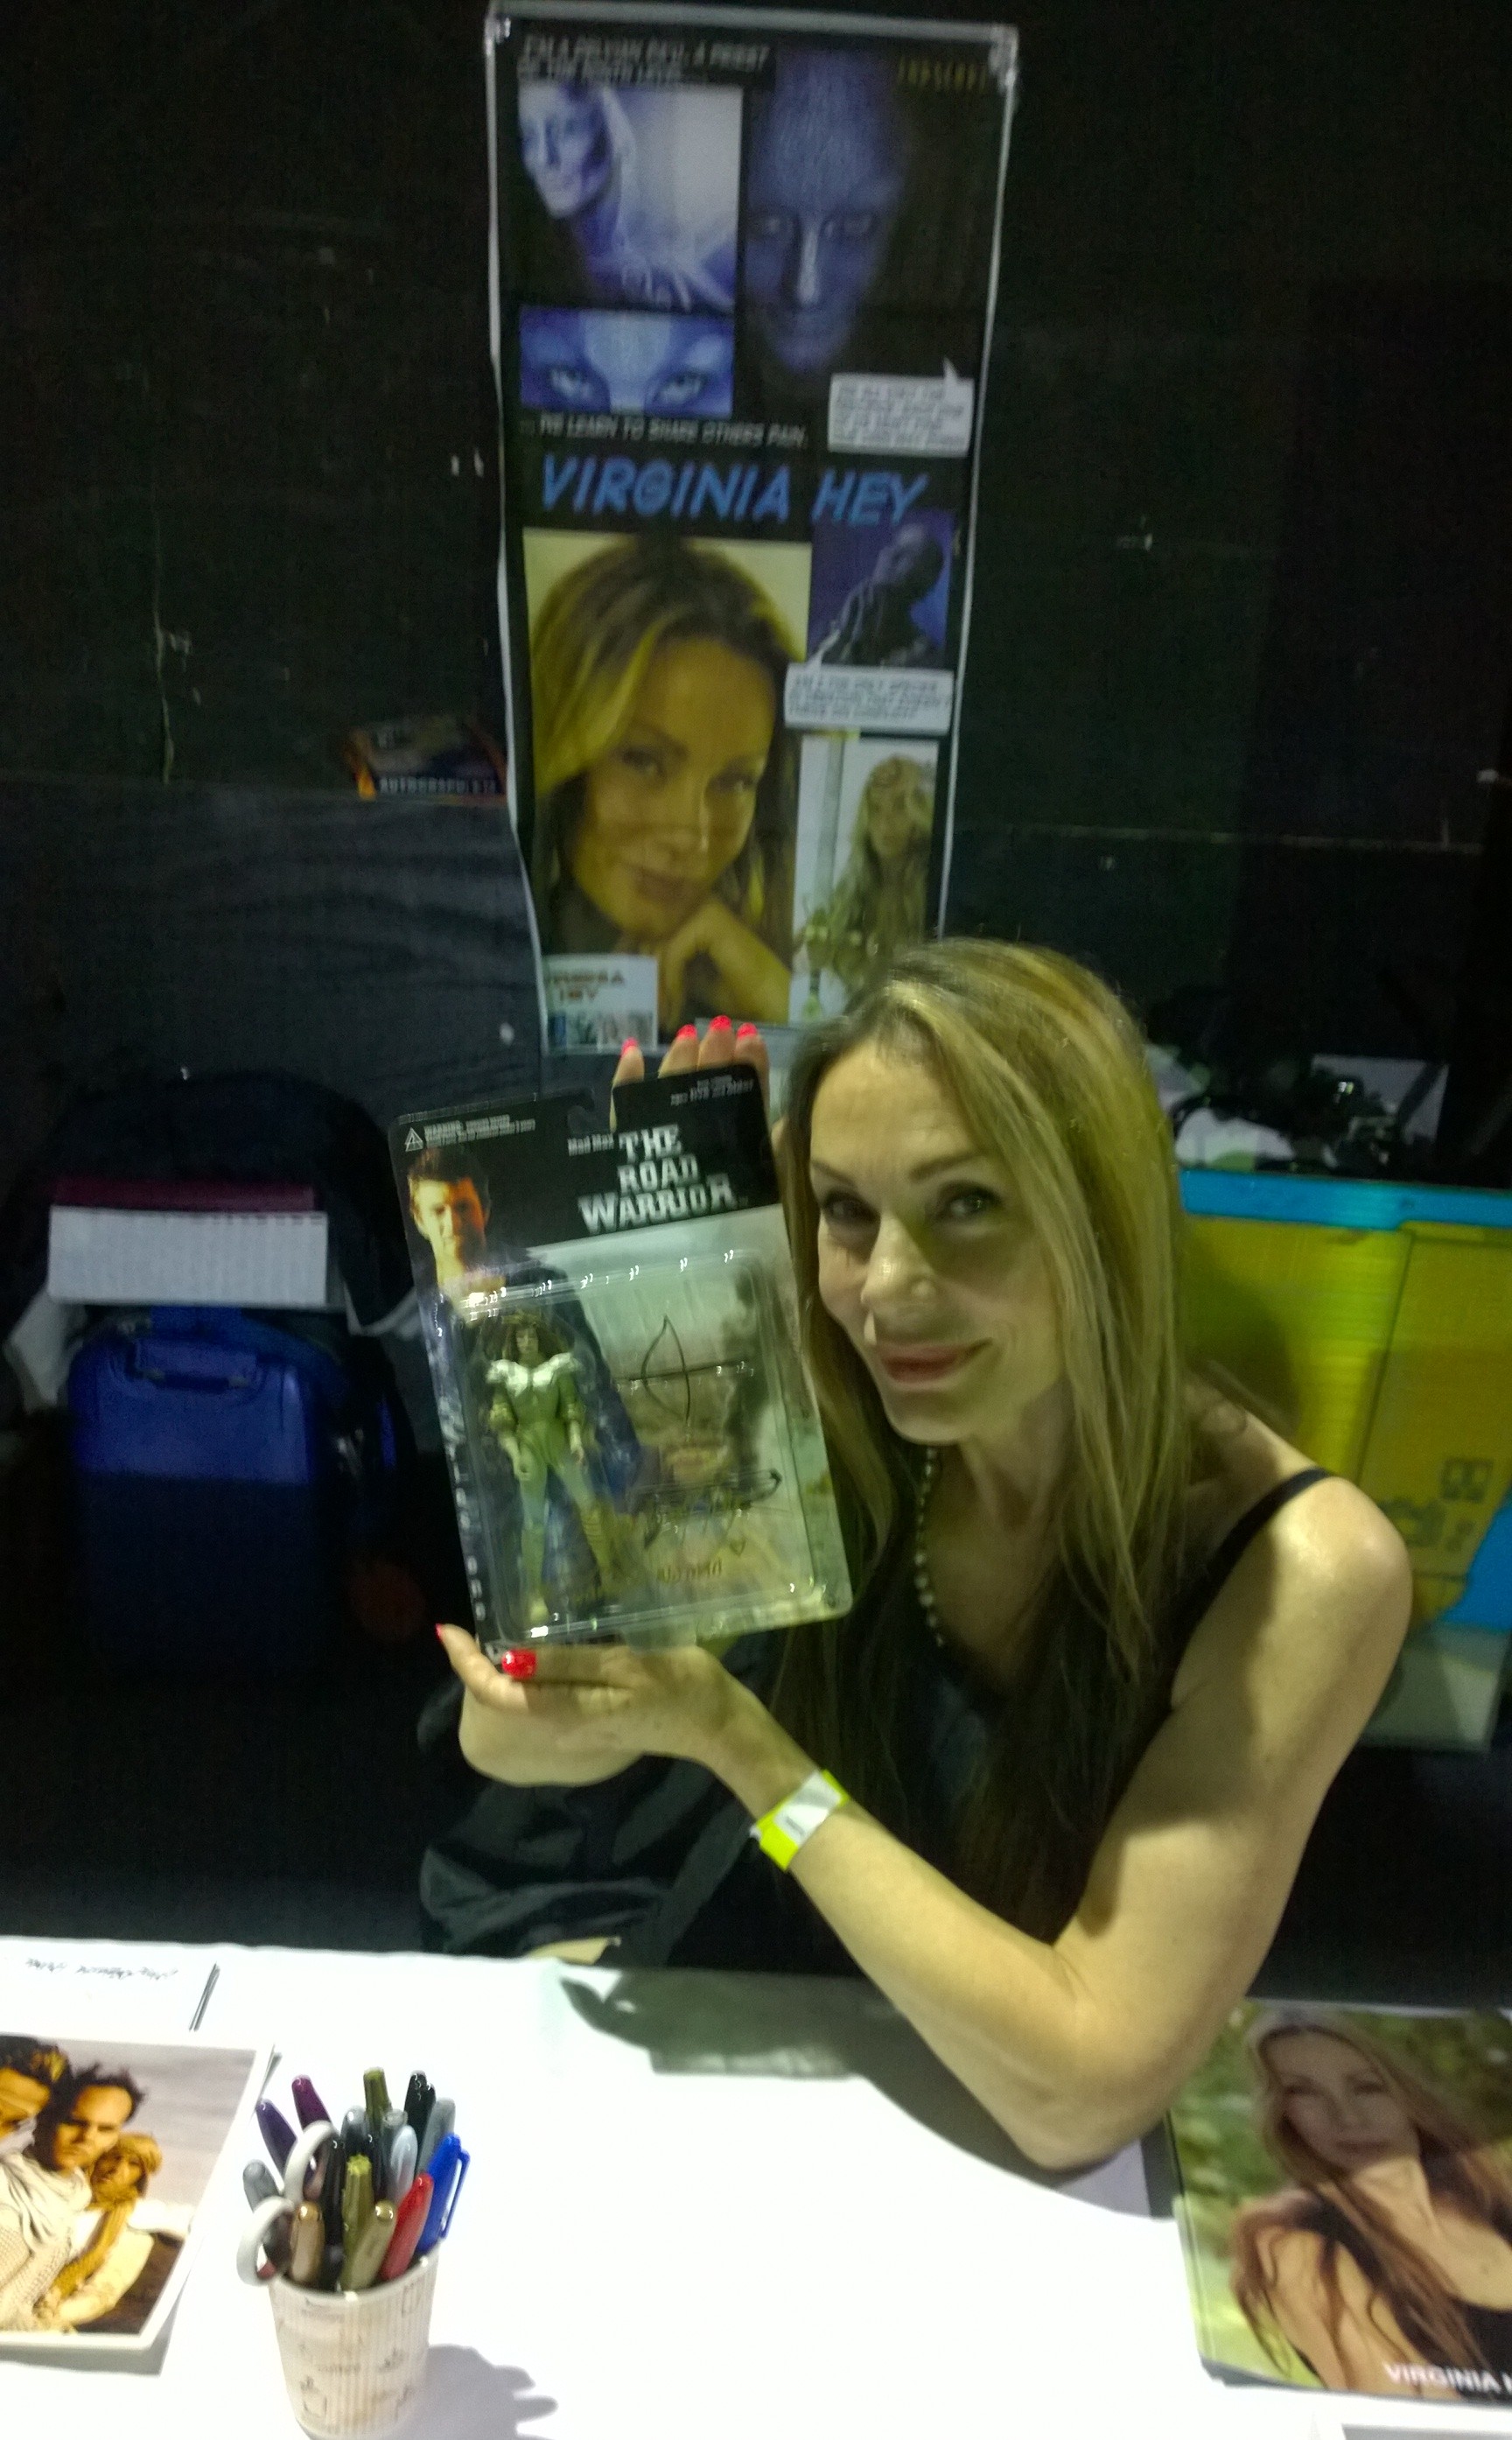 Holding my Warrior Woman figurine. April 2015 at a Comiccon